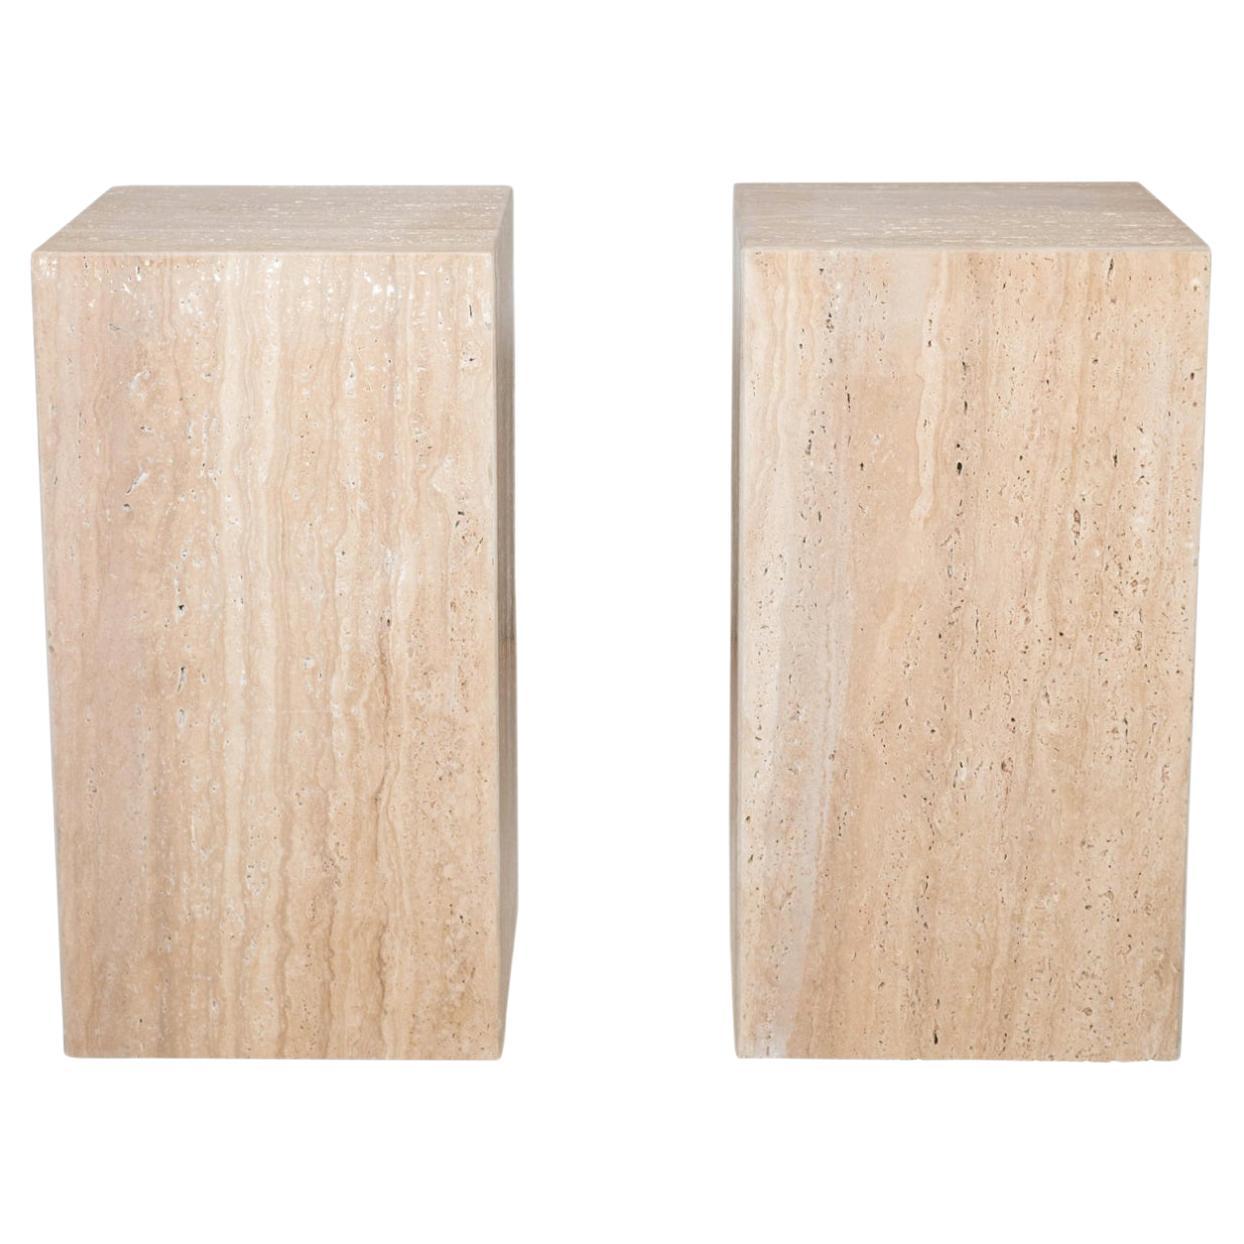 1980s Italian Travertine Tower Cube Side Tables - a Pair